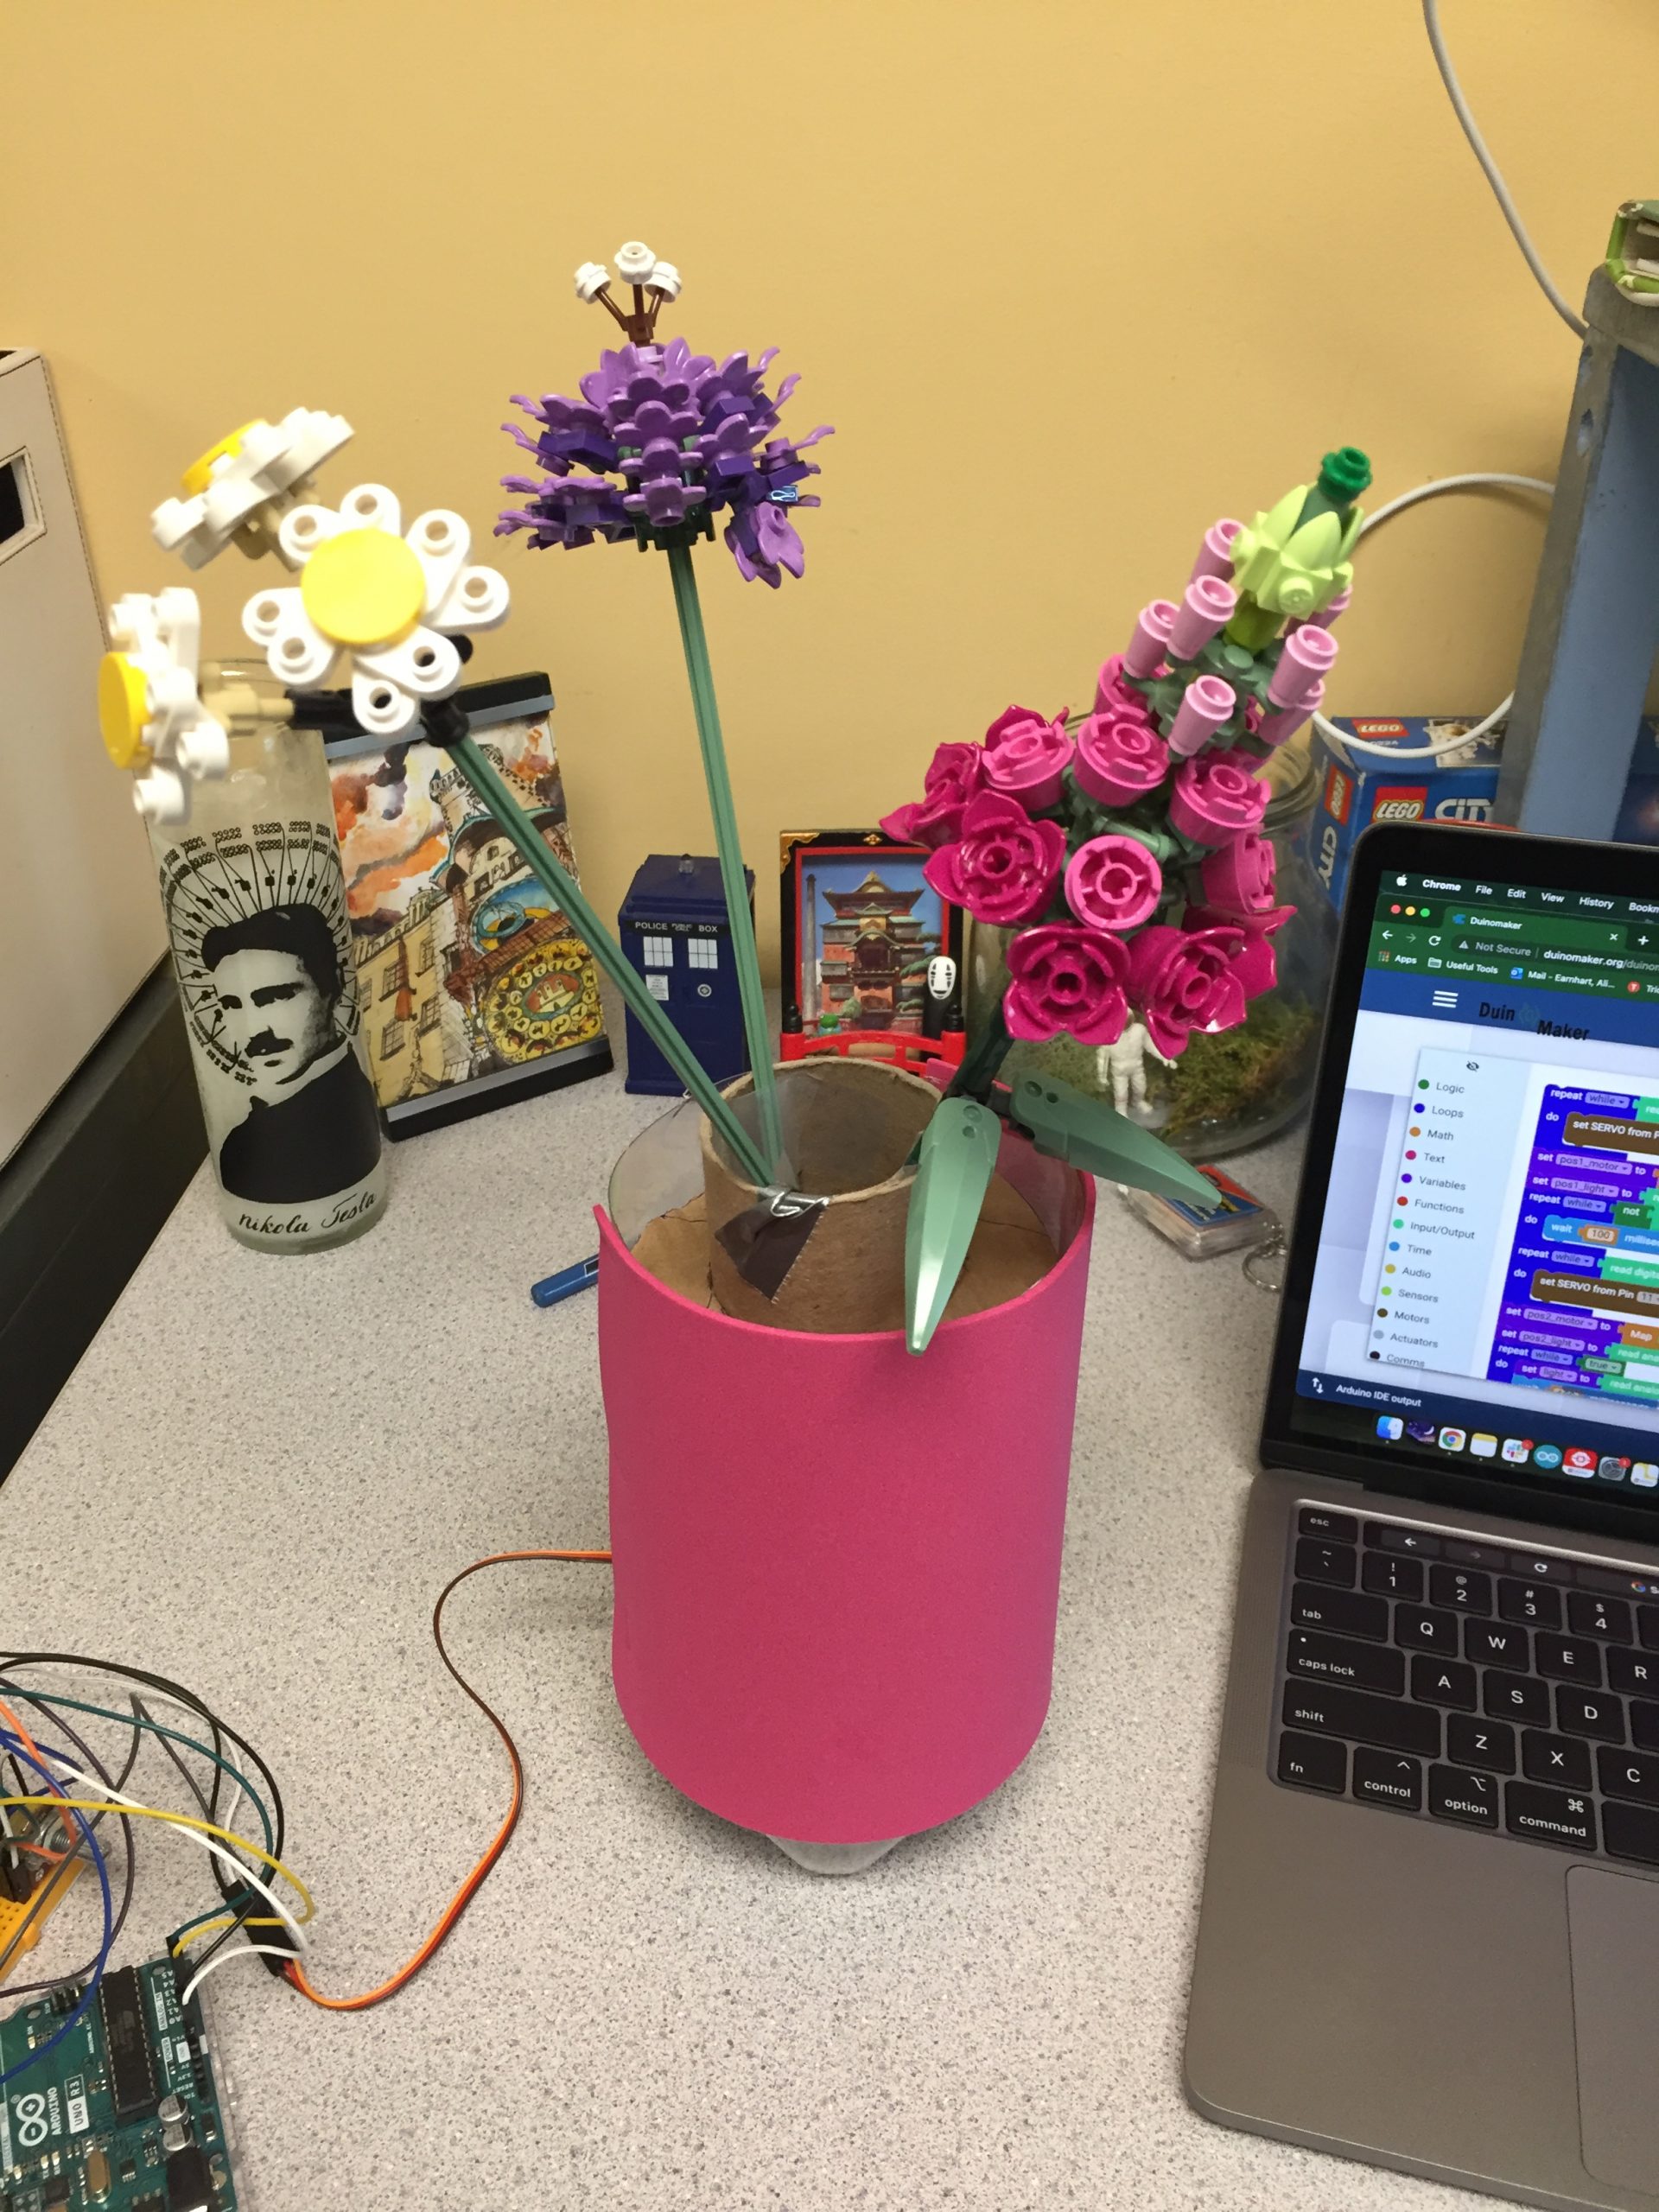 Flowers made of LEGO in a vase on a desk, next to a computer and some electronics components.